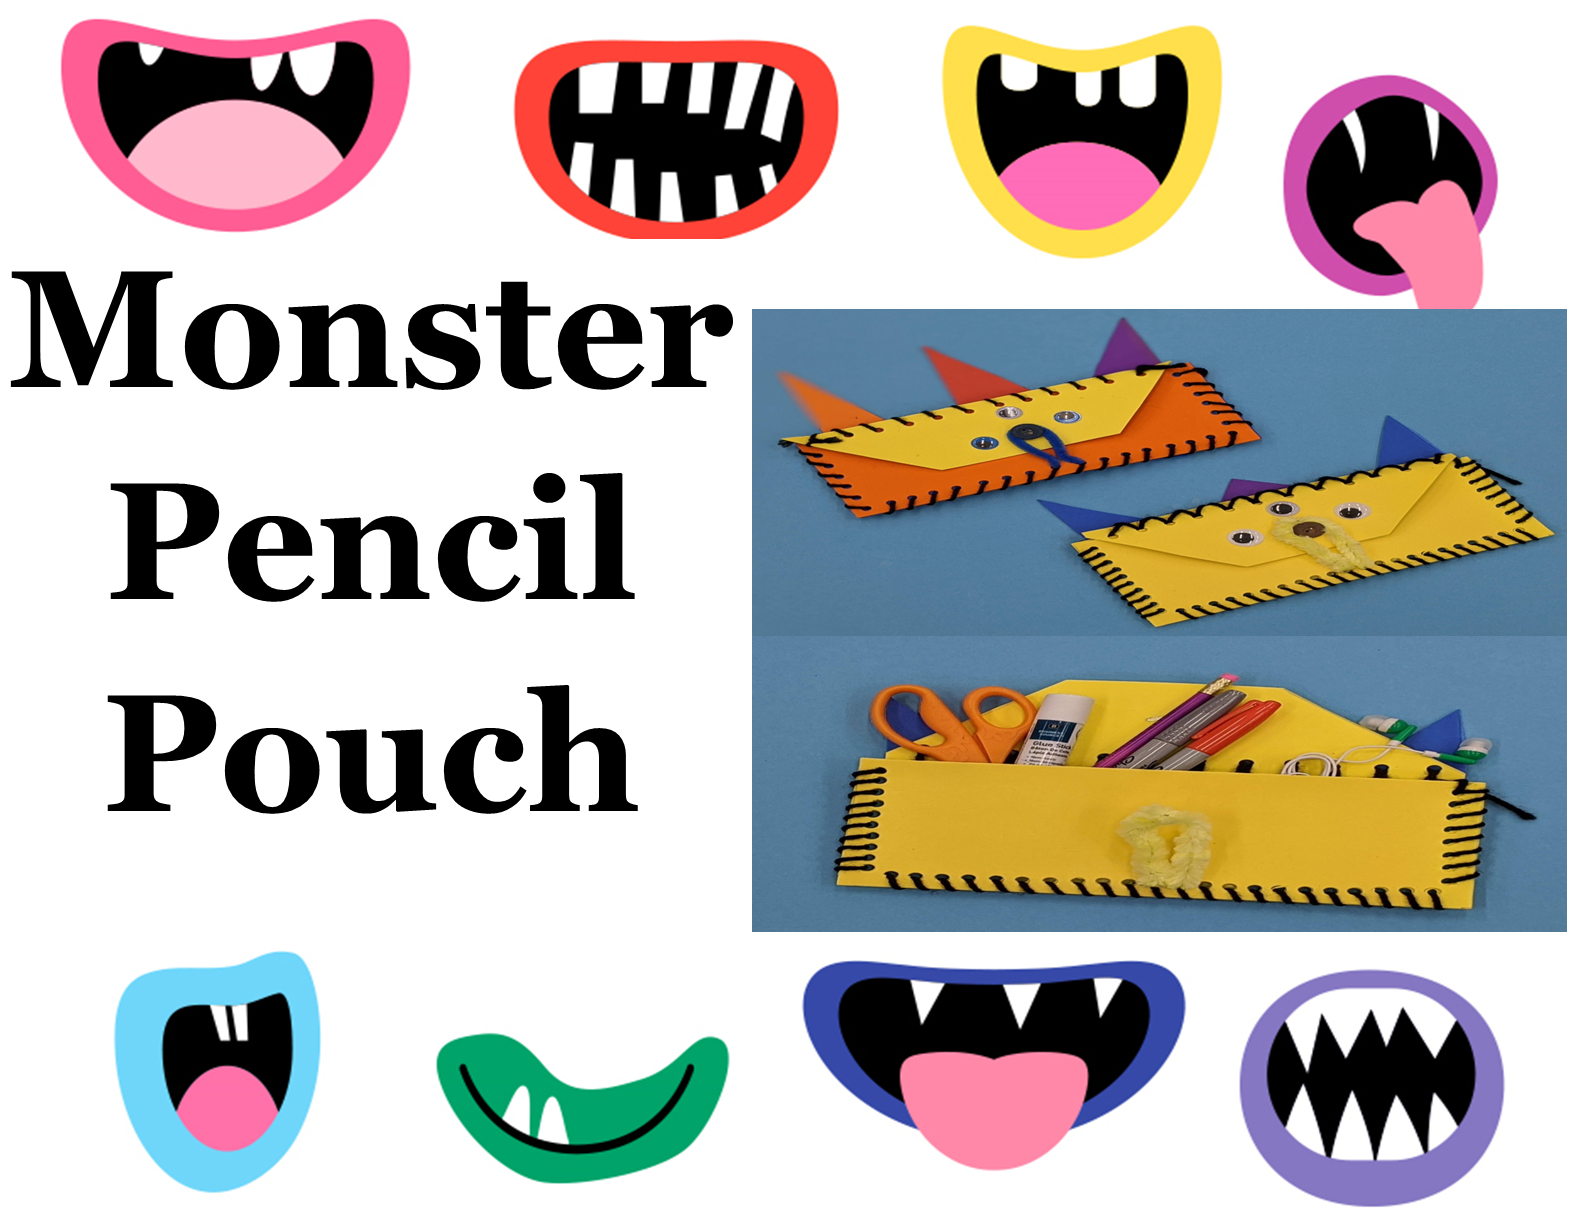 Starting August 31st at the Main Library our Monster Pencil Pouch craft kits will be available. Curbside only. Get them while supplies last.